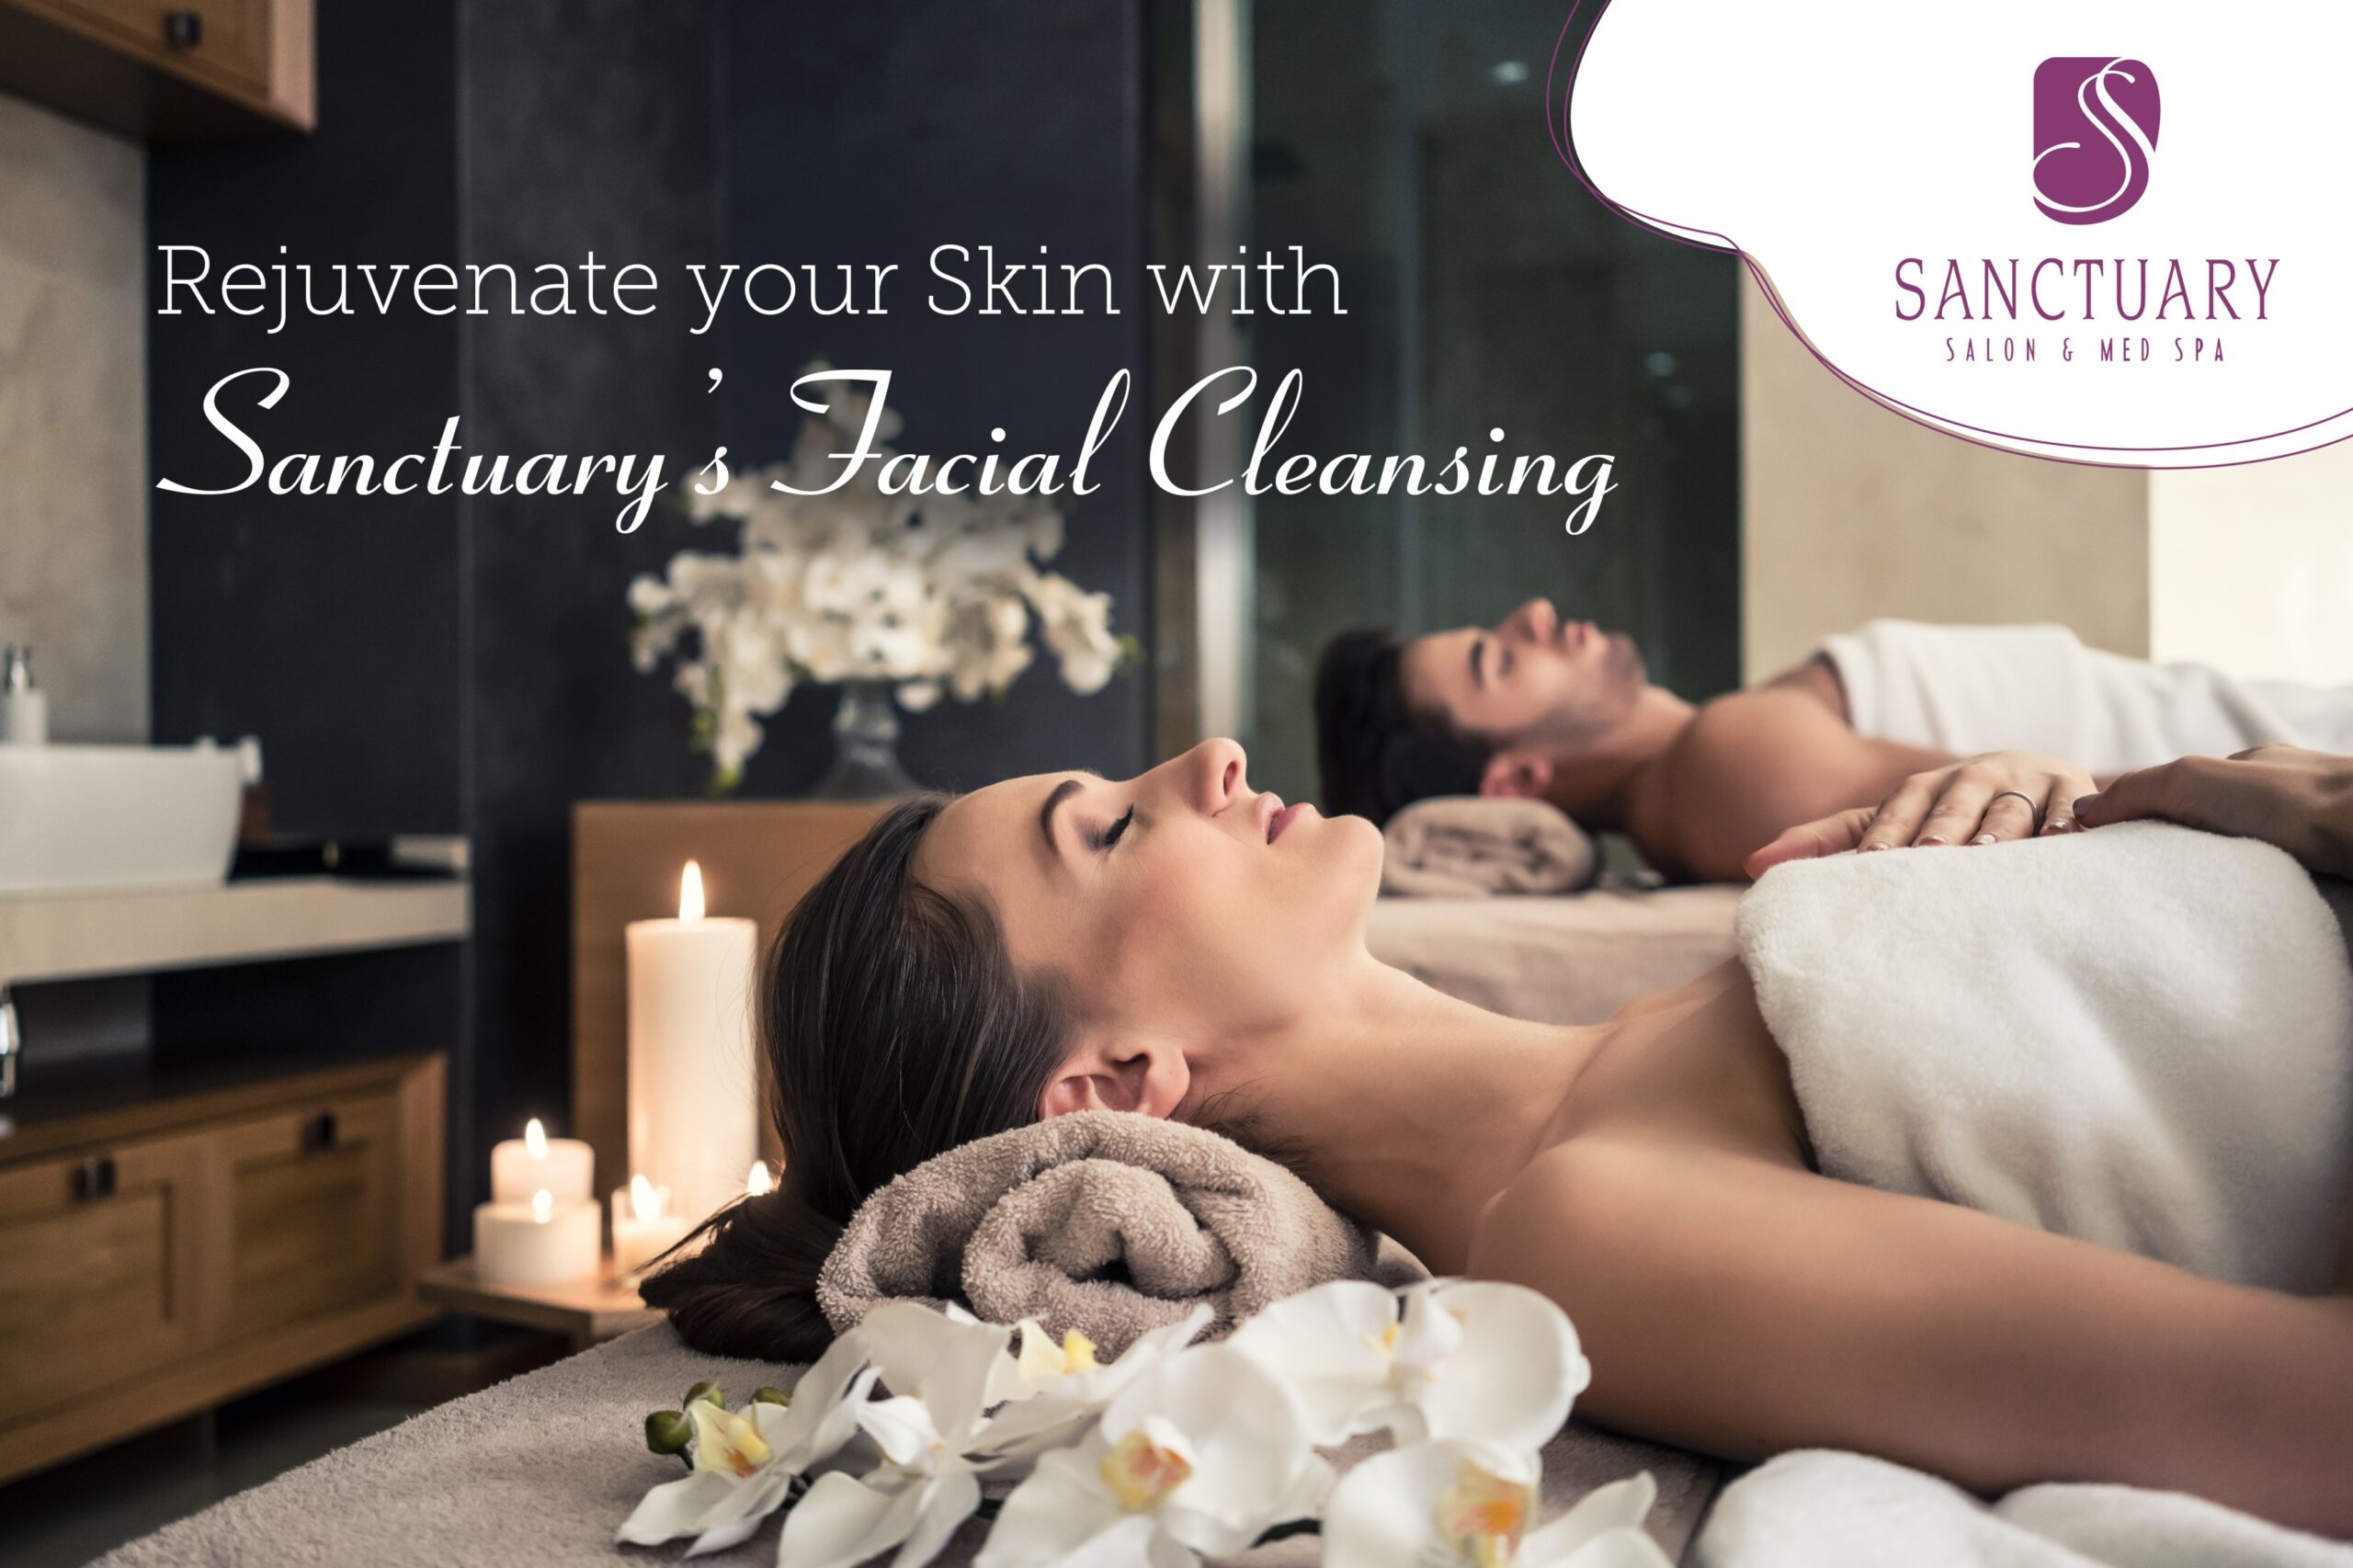 Rejuvenate your Skin with Sanctuary’s Facial Cleansing